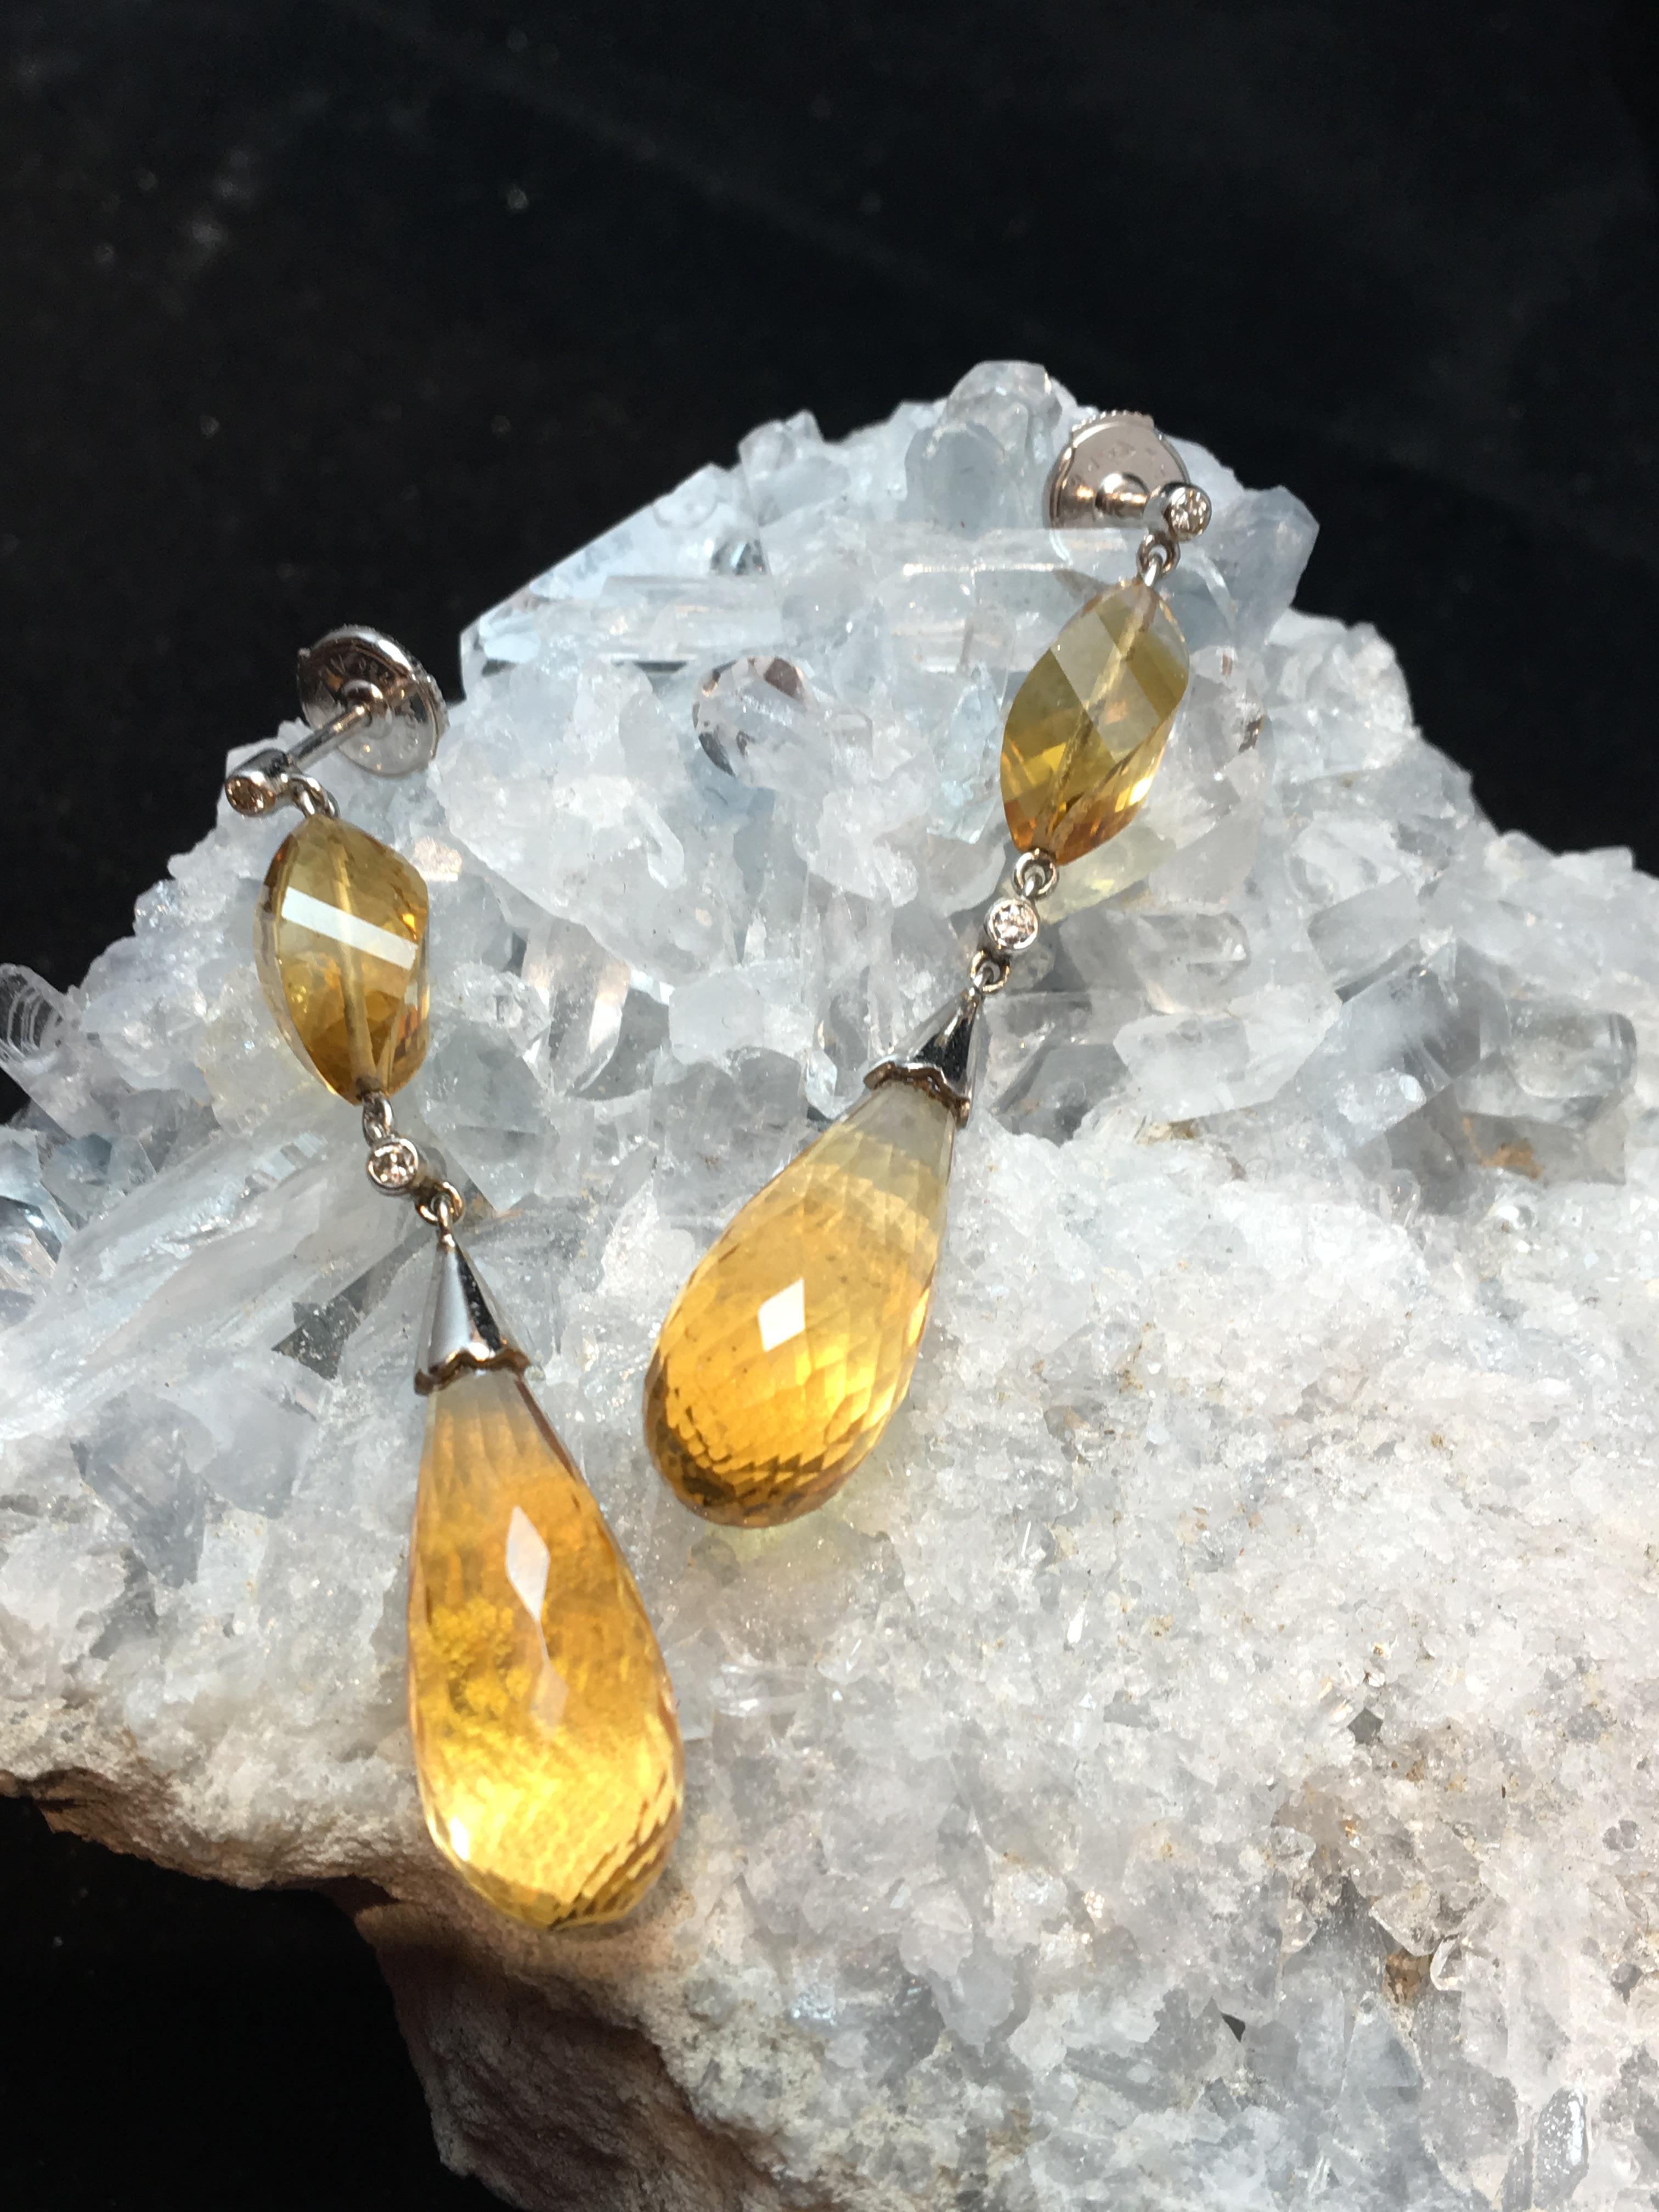 18ct gold earrings set with citrine cut into briolettes, and 4 small brilliants

Alpa secure closure system

Total peas: 8.58gr

Length: 4.5cm